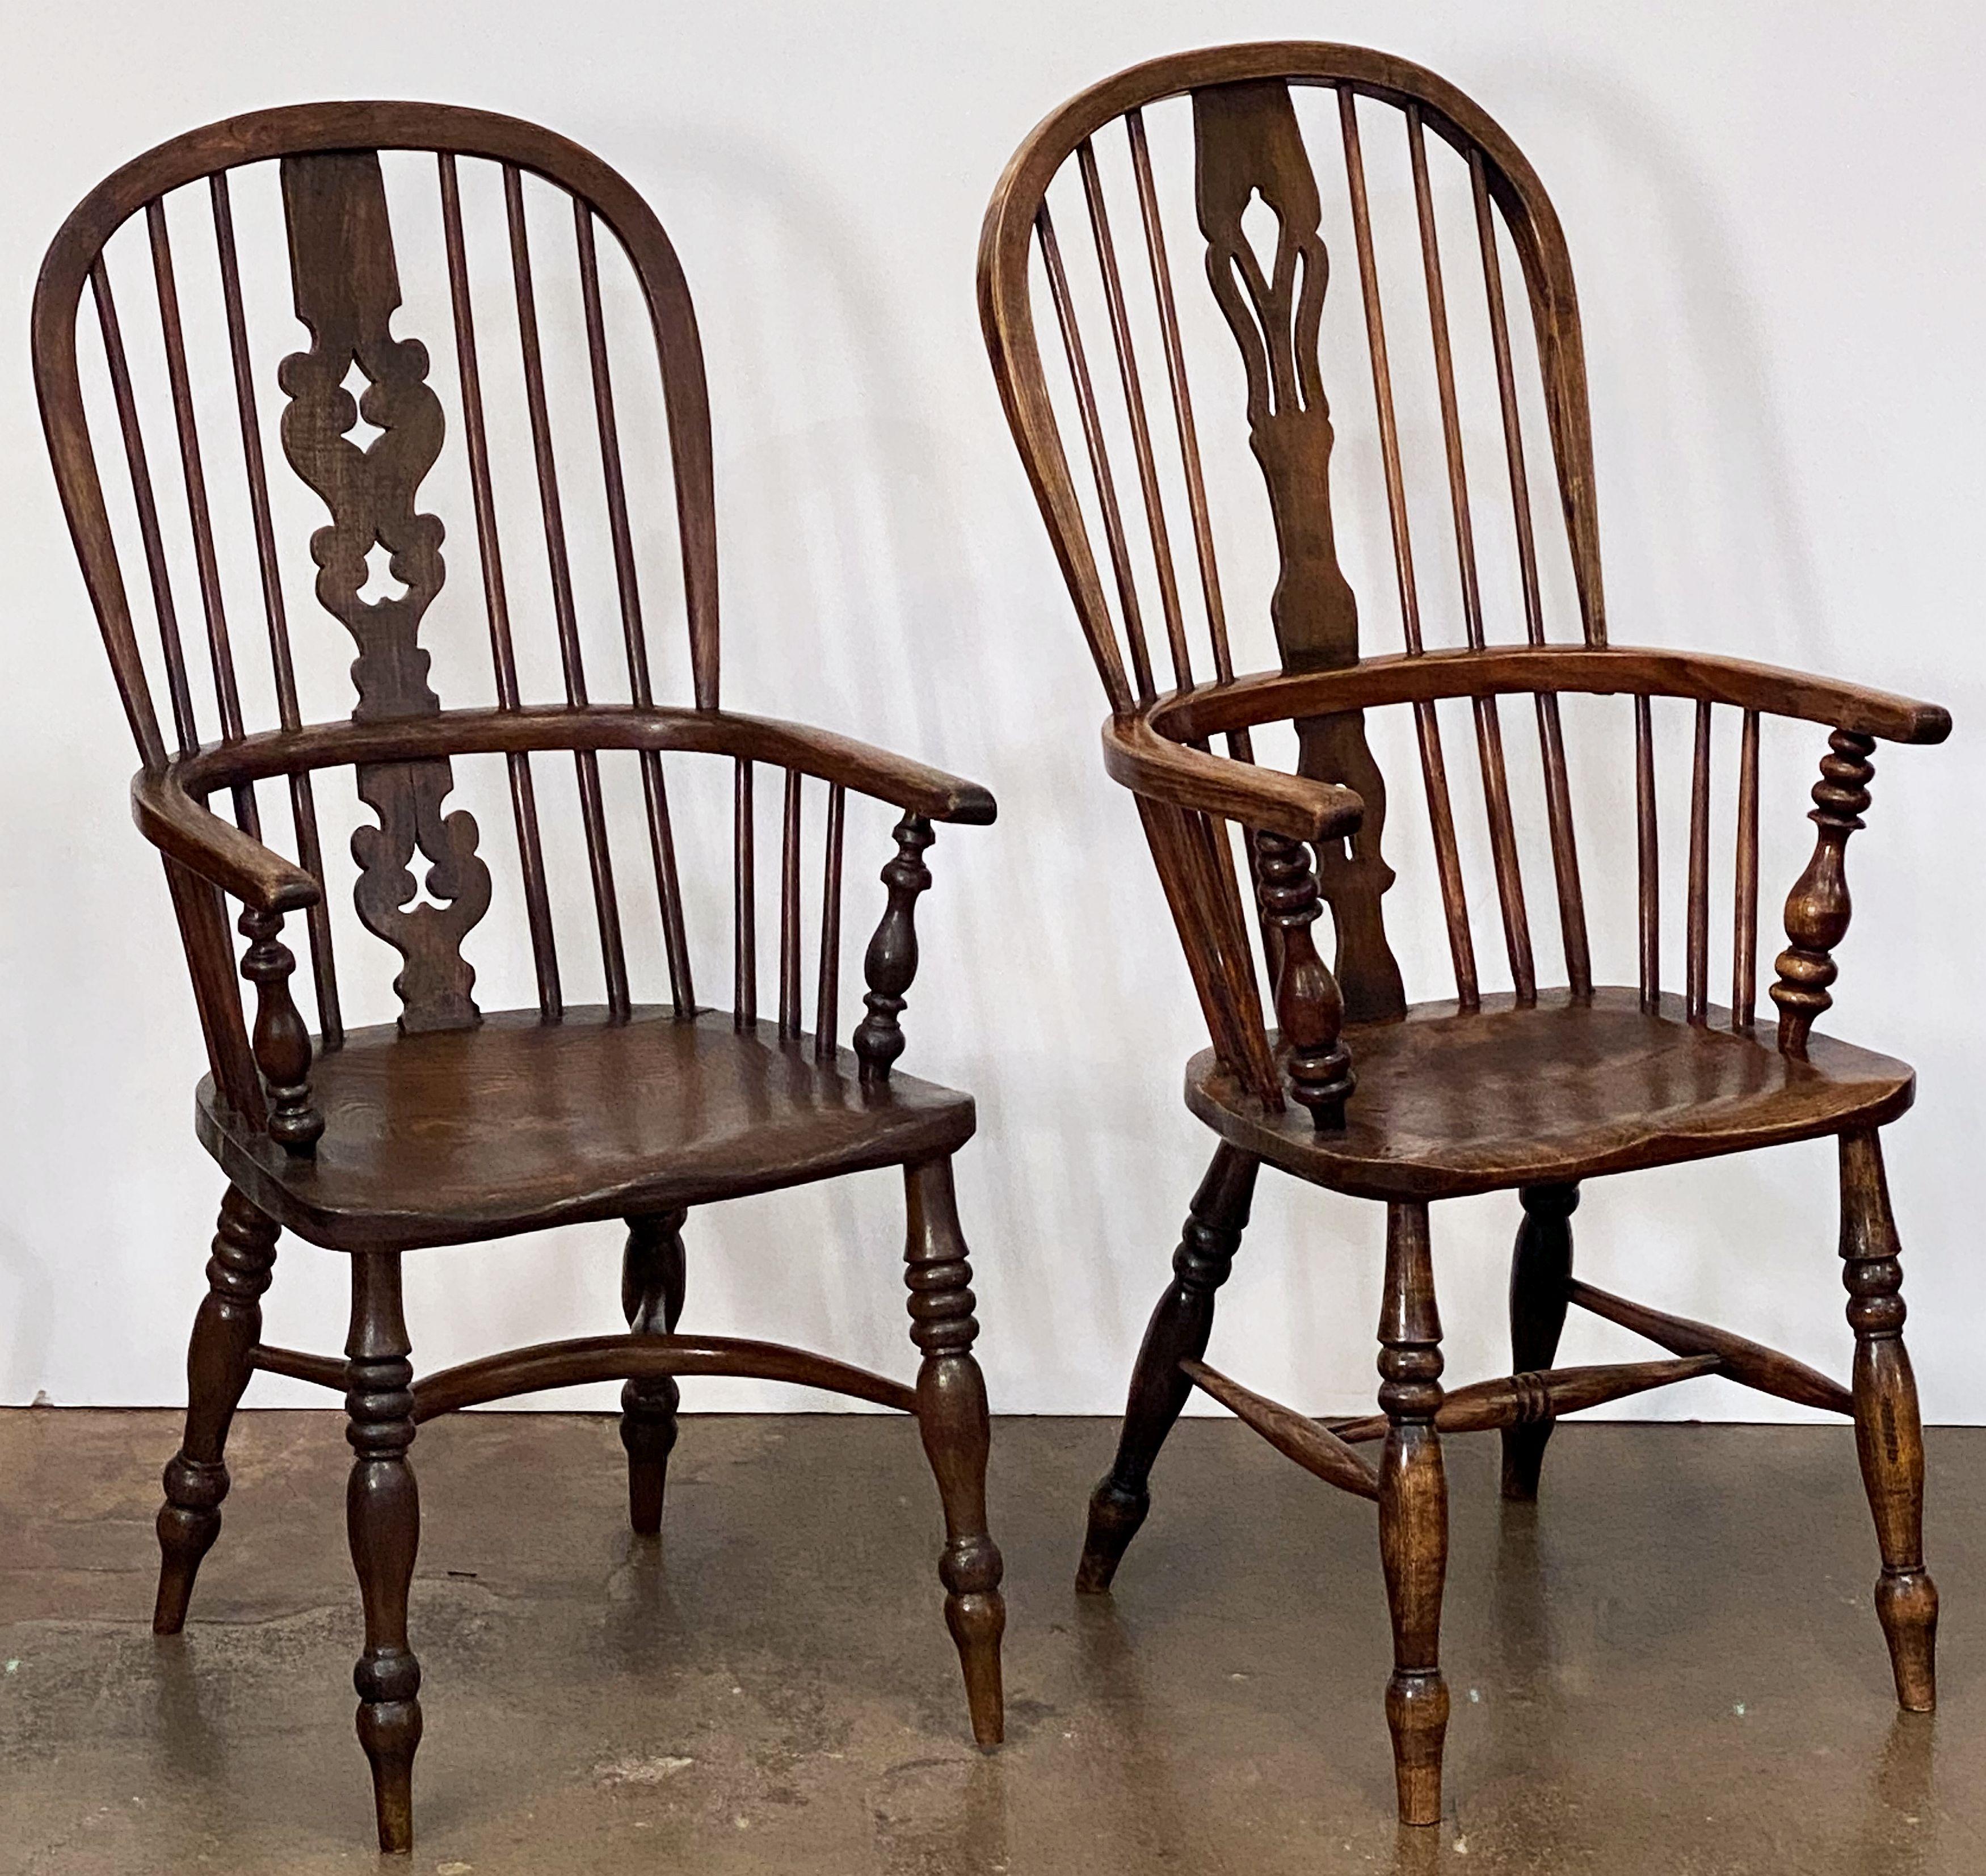 Country Harlequin Set of Eight Windsor Chairs from England